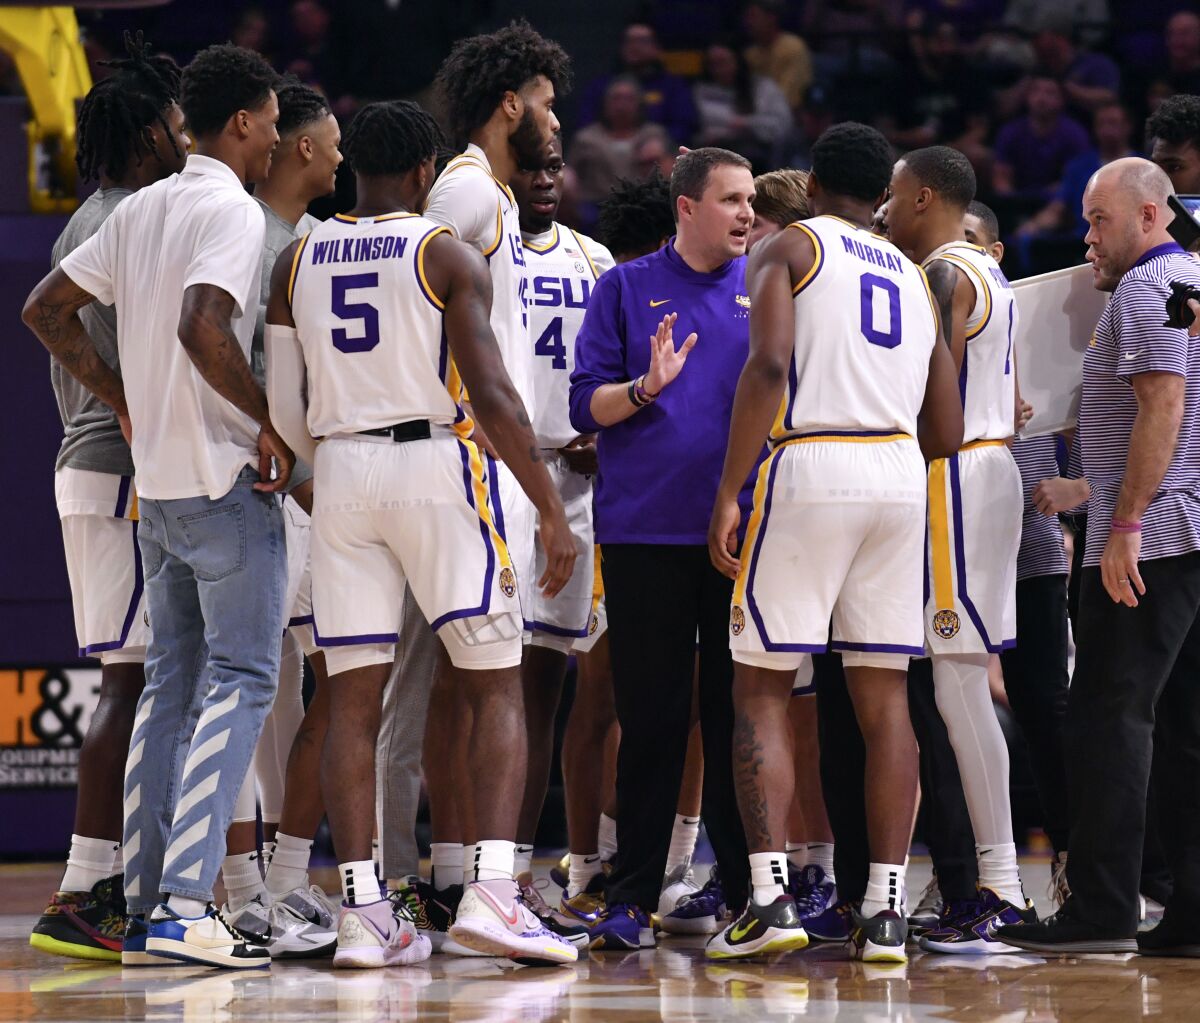 LSU head coach Will Wade speaks with his players during a timeout against Louisiana-Monroe in an NCAA college basketball game Tuesday, Nov. 9, 2021, at the LSU PMAC in Baton Rouge, La. (Hilary Scheinuk/The Advocate via AP)